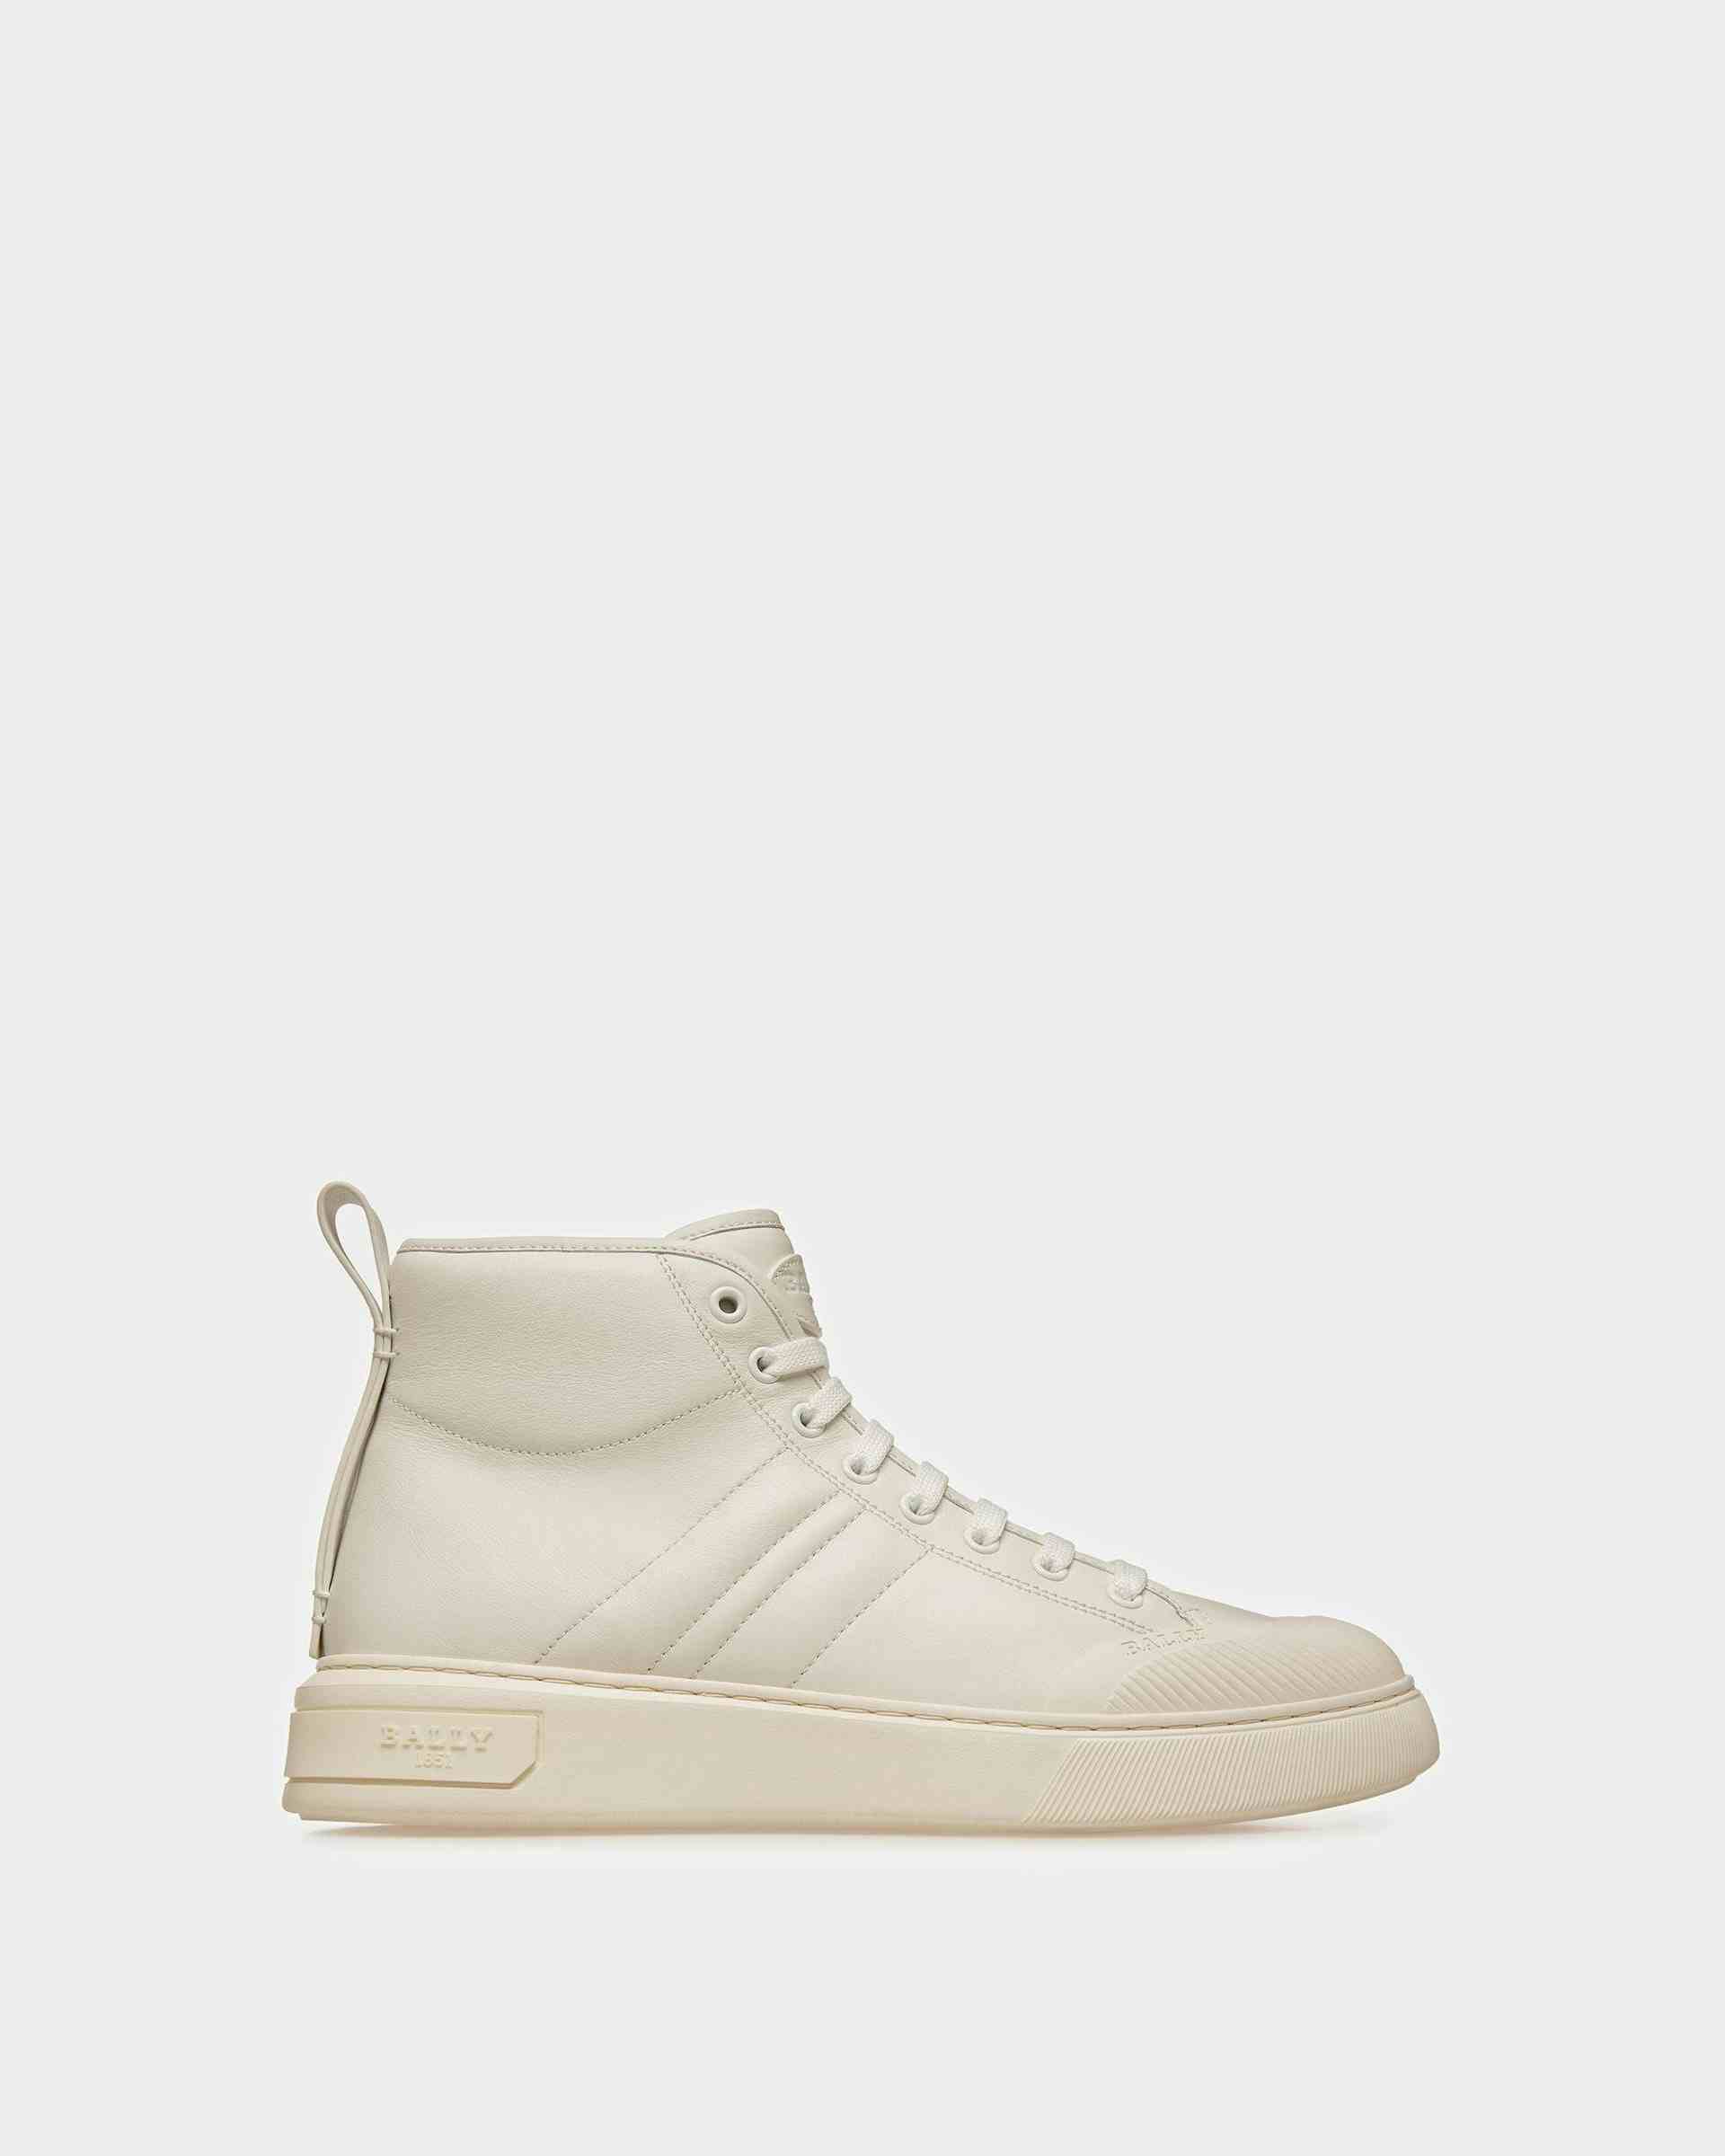 Maren Leather Sneakers In White - Women's - Bally